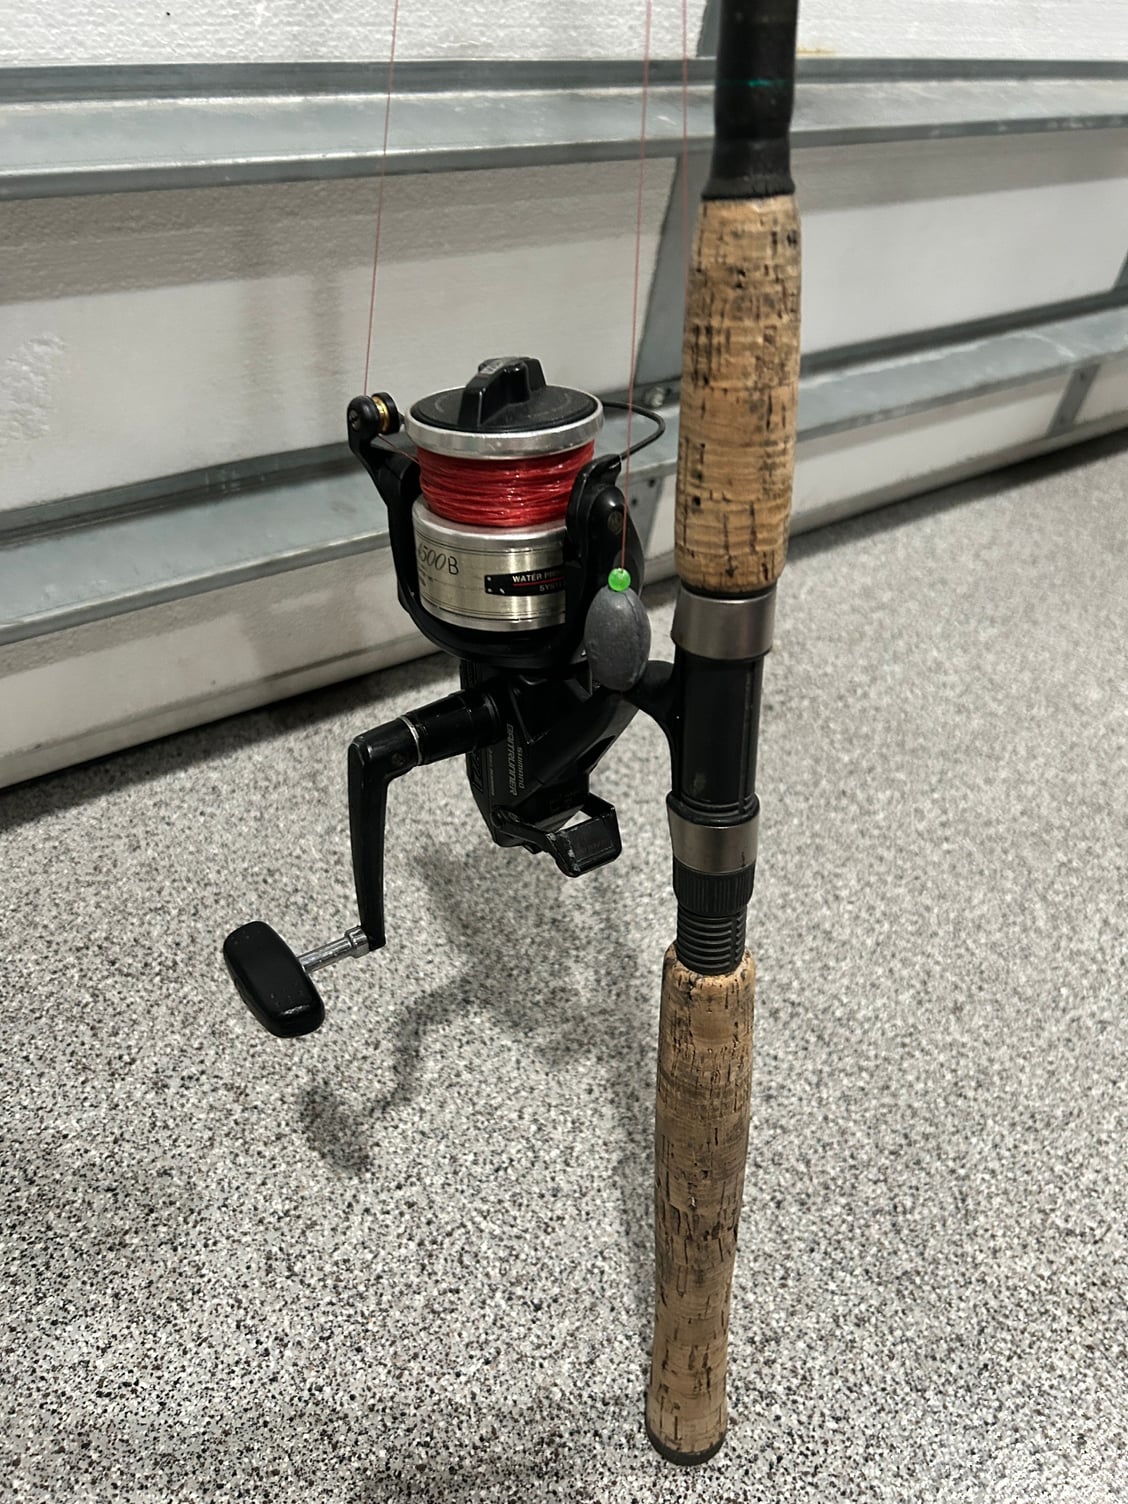 Shimano Baitrunner 4500B Reels-LIKE NEW - The Hull Truth - Boating and  Fishing Forum